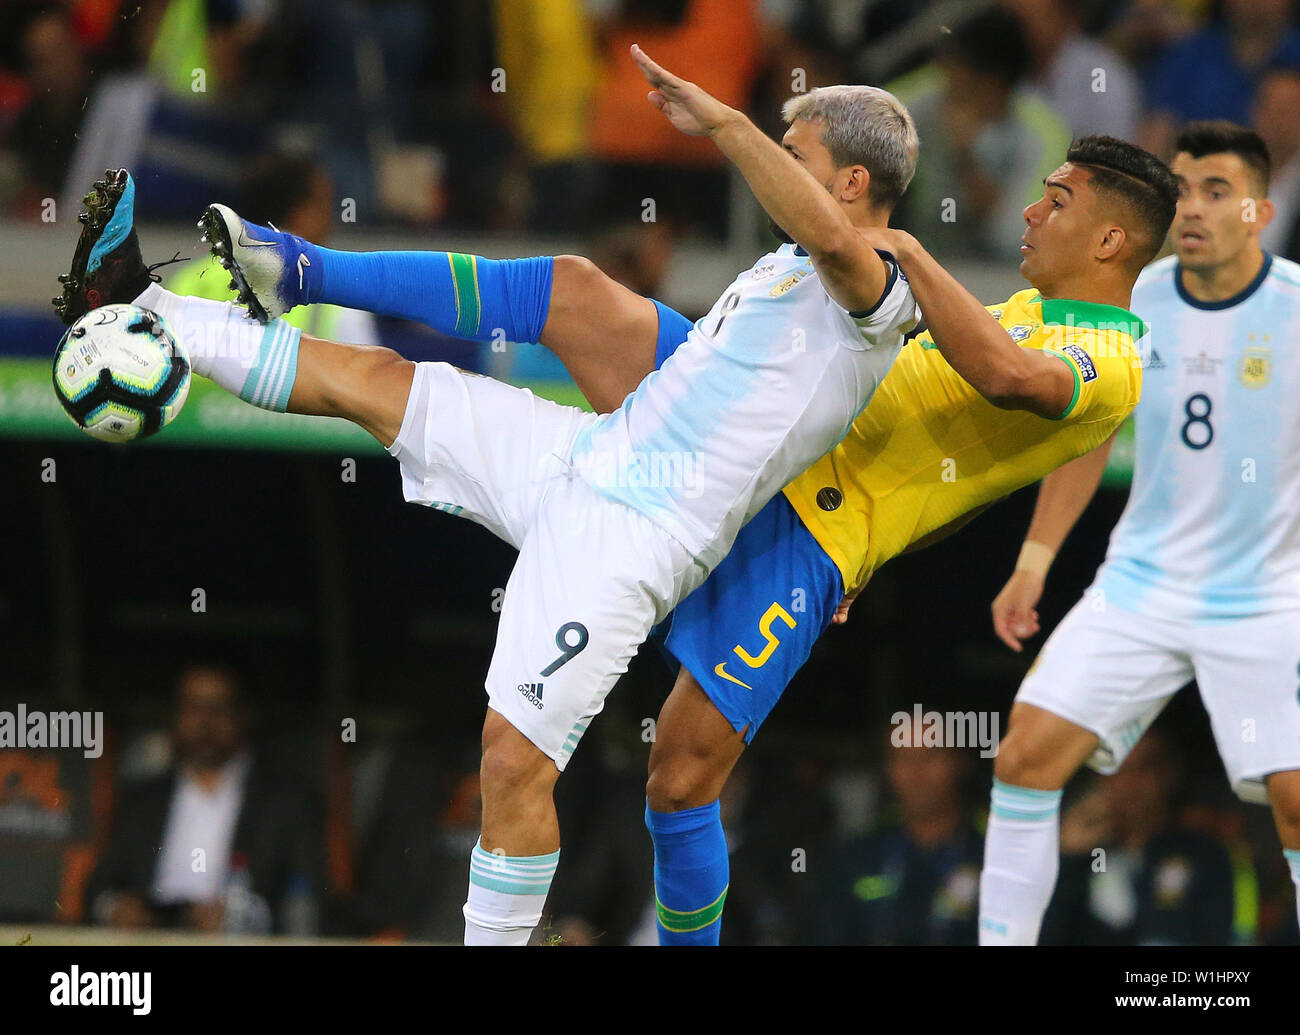 Belo Horizonte, Brazil. 02nd July, 2019. Sergio Kun Aguero from Argentina and Casemiro from Brazil during a match between Brazil and Argentina, valid for the semifinal of Copa America 2019, held this Tuesday (02) at the Estádio do Mineirão in Belo Horizonte, MG. Credit: Rodolfo Buhrer/La Imagem/FotoArena/Alamy Live News Stock Photo